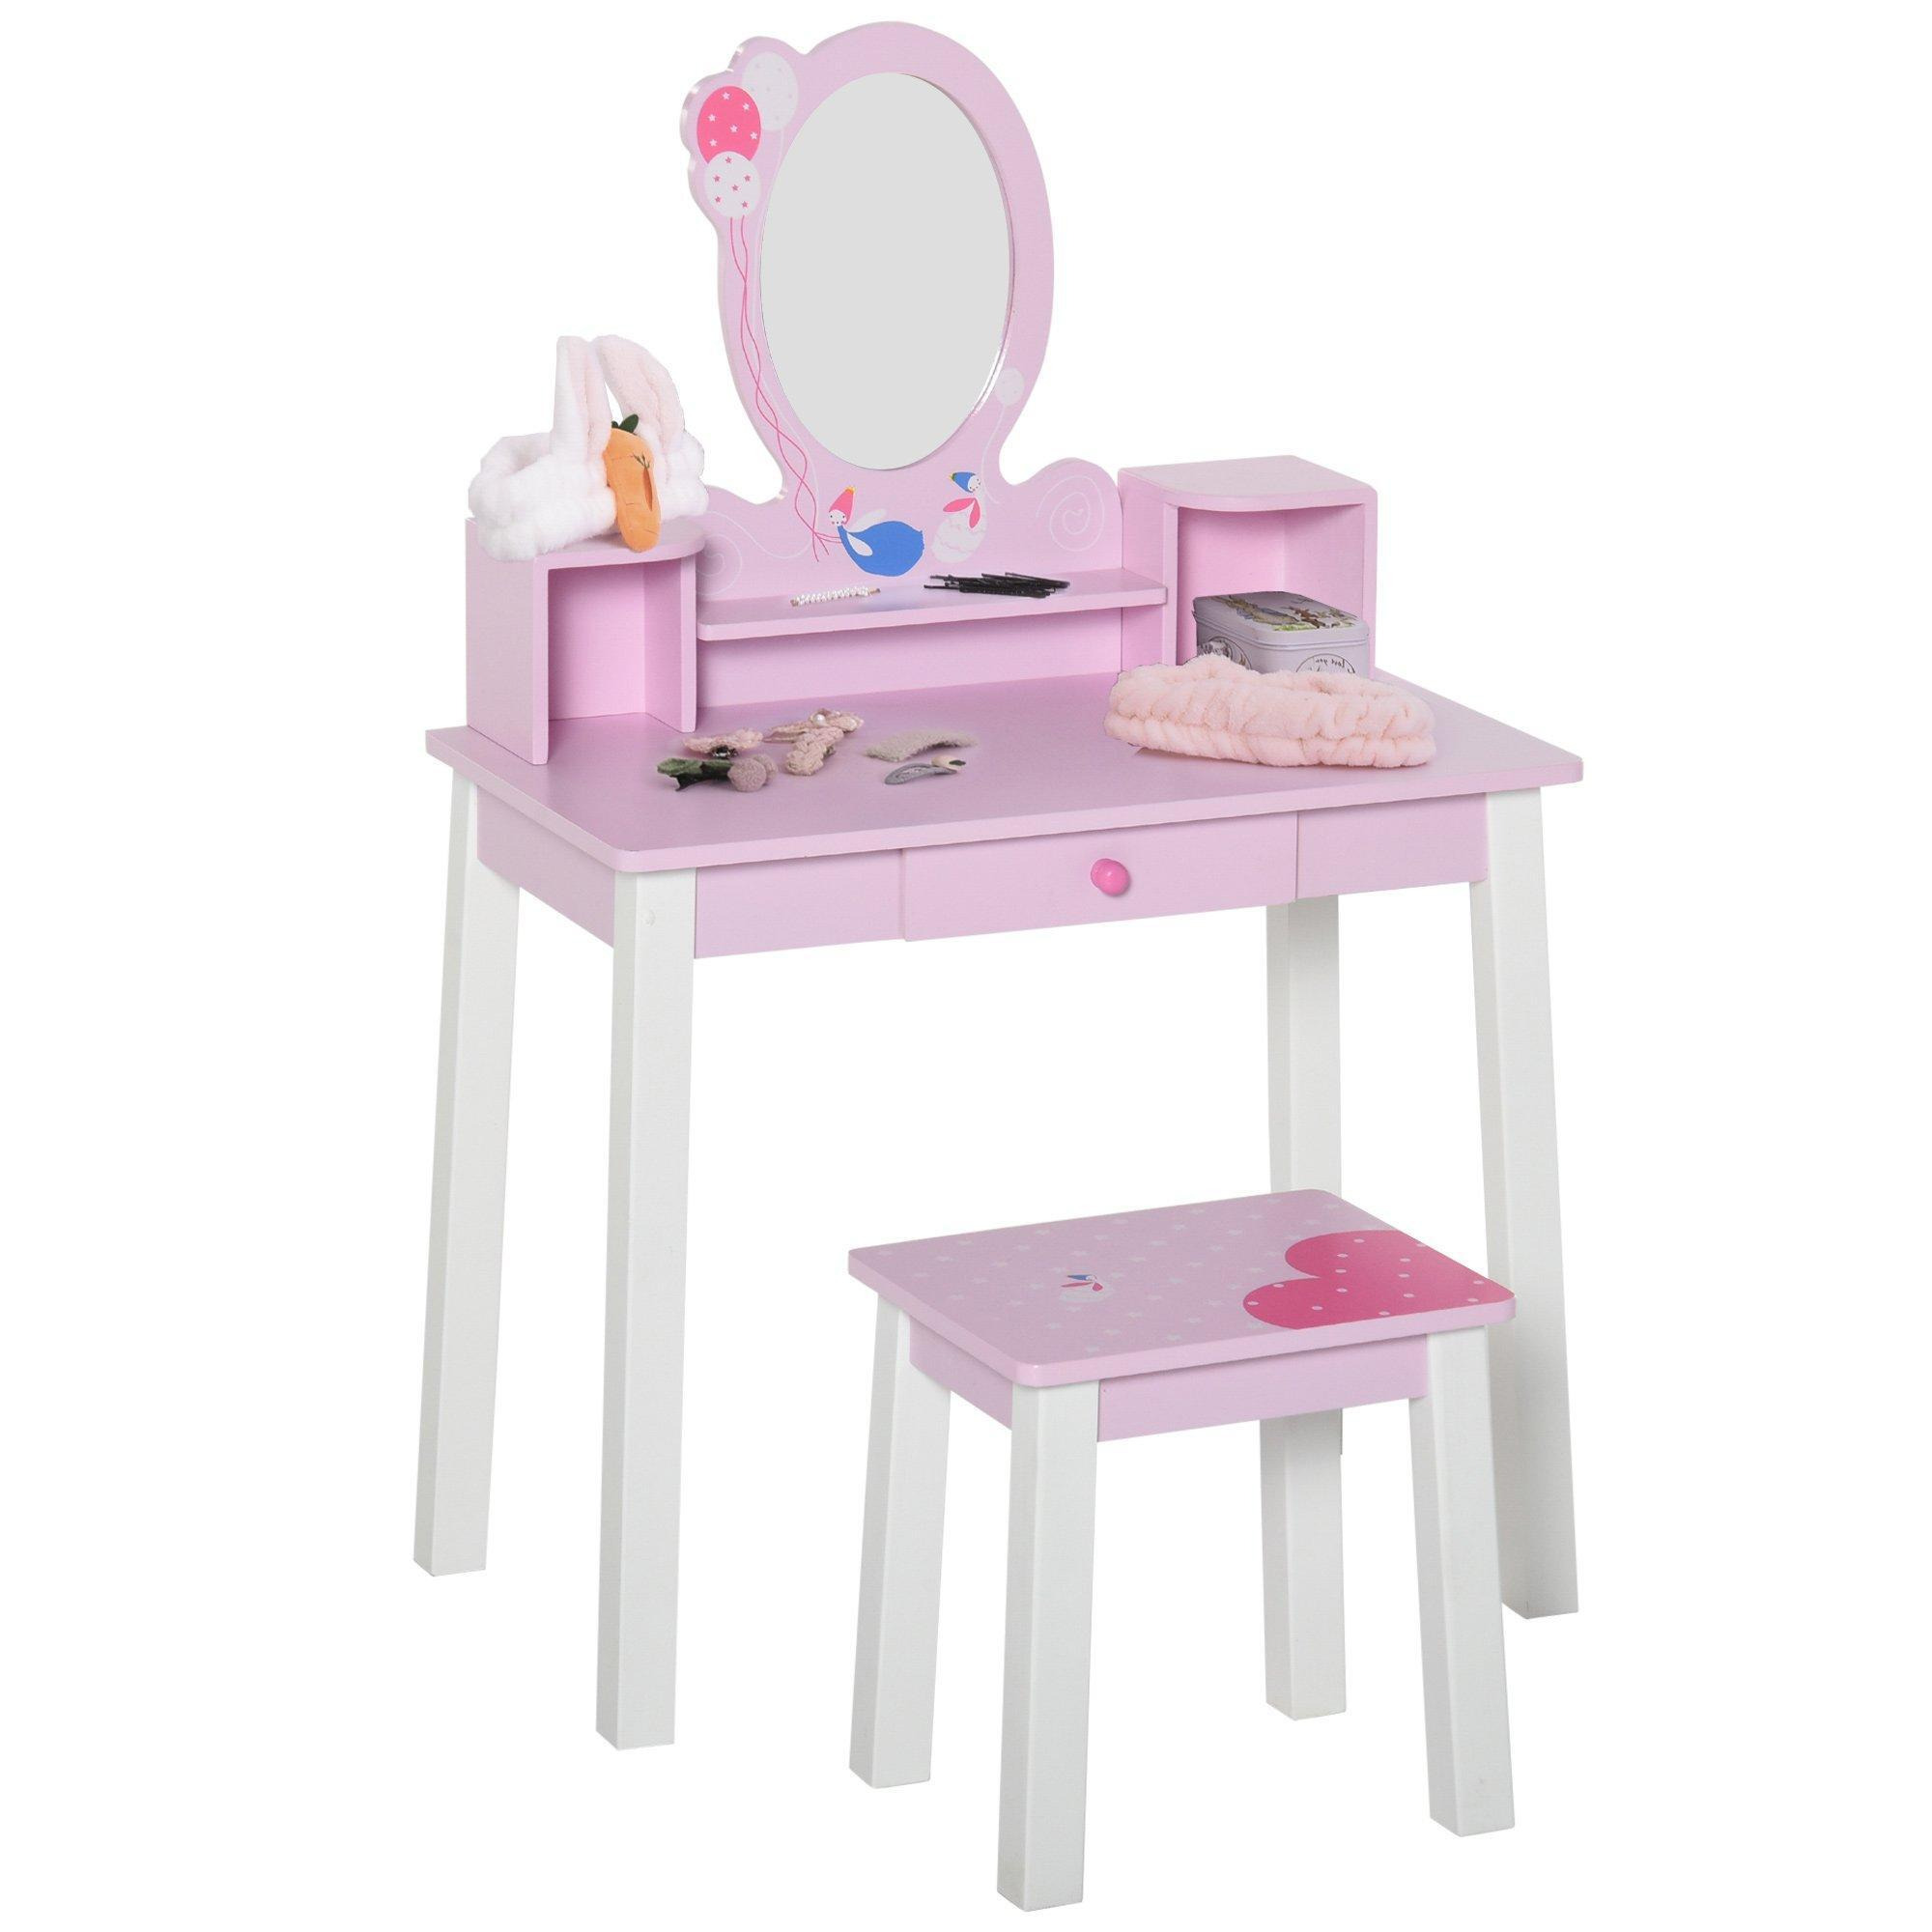 Kids Wooden Dressing Table with Stool Mirror Table and Desk Set Toys Pink - image 1